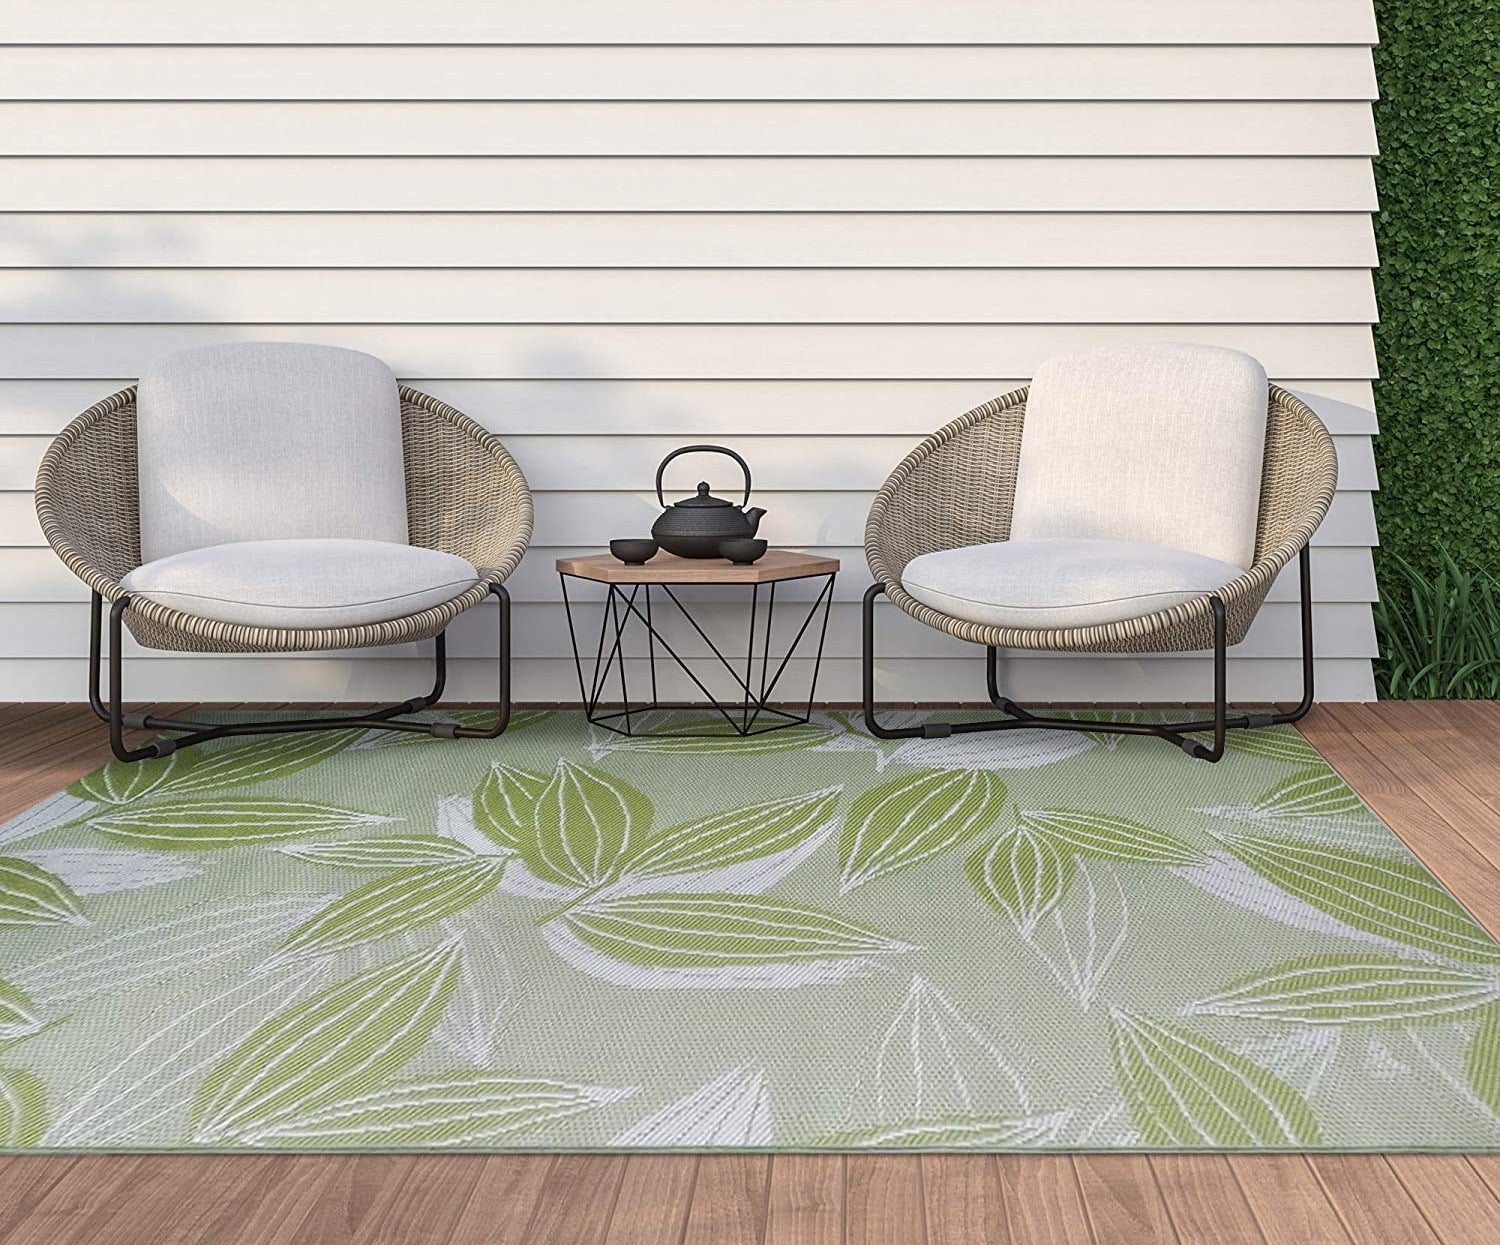 a patterned outdoor rug on a deck with two lounge chairs